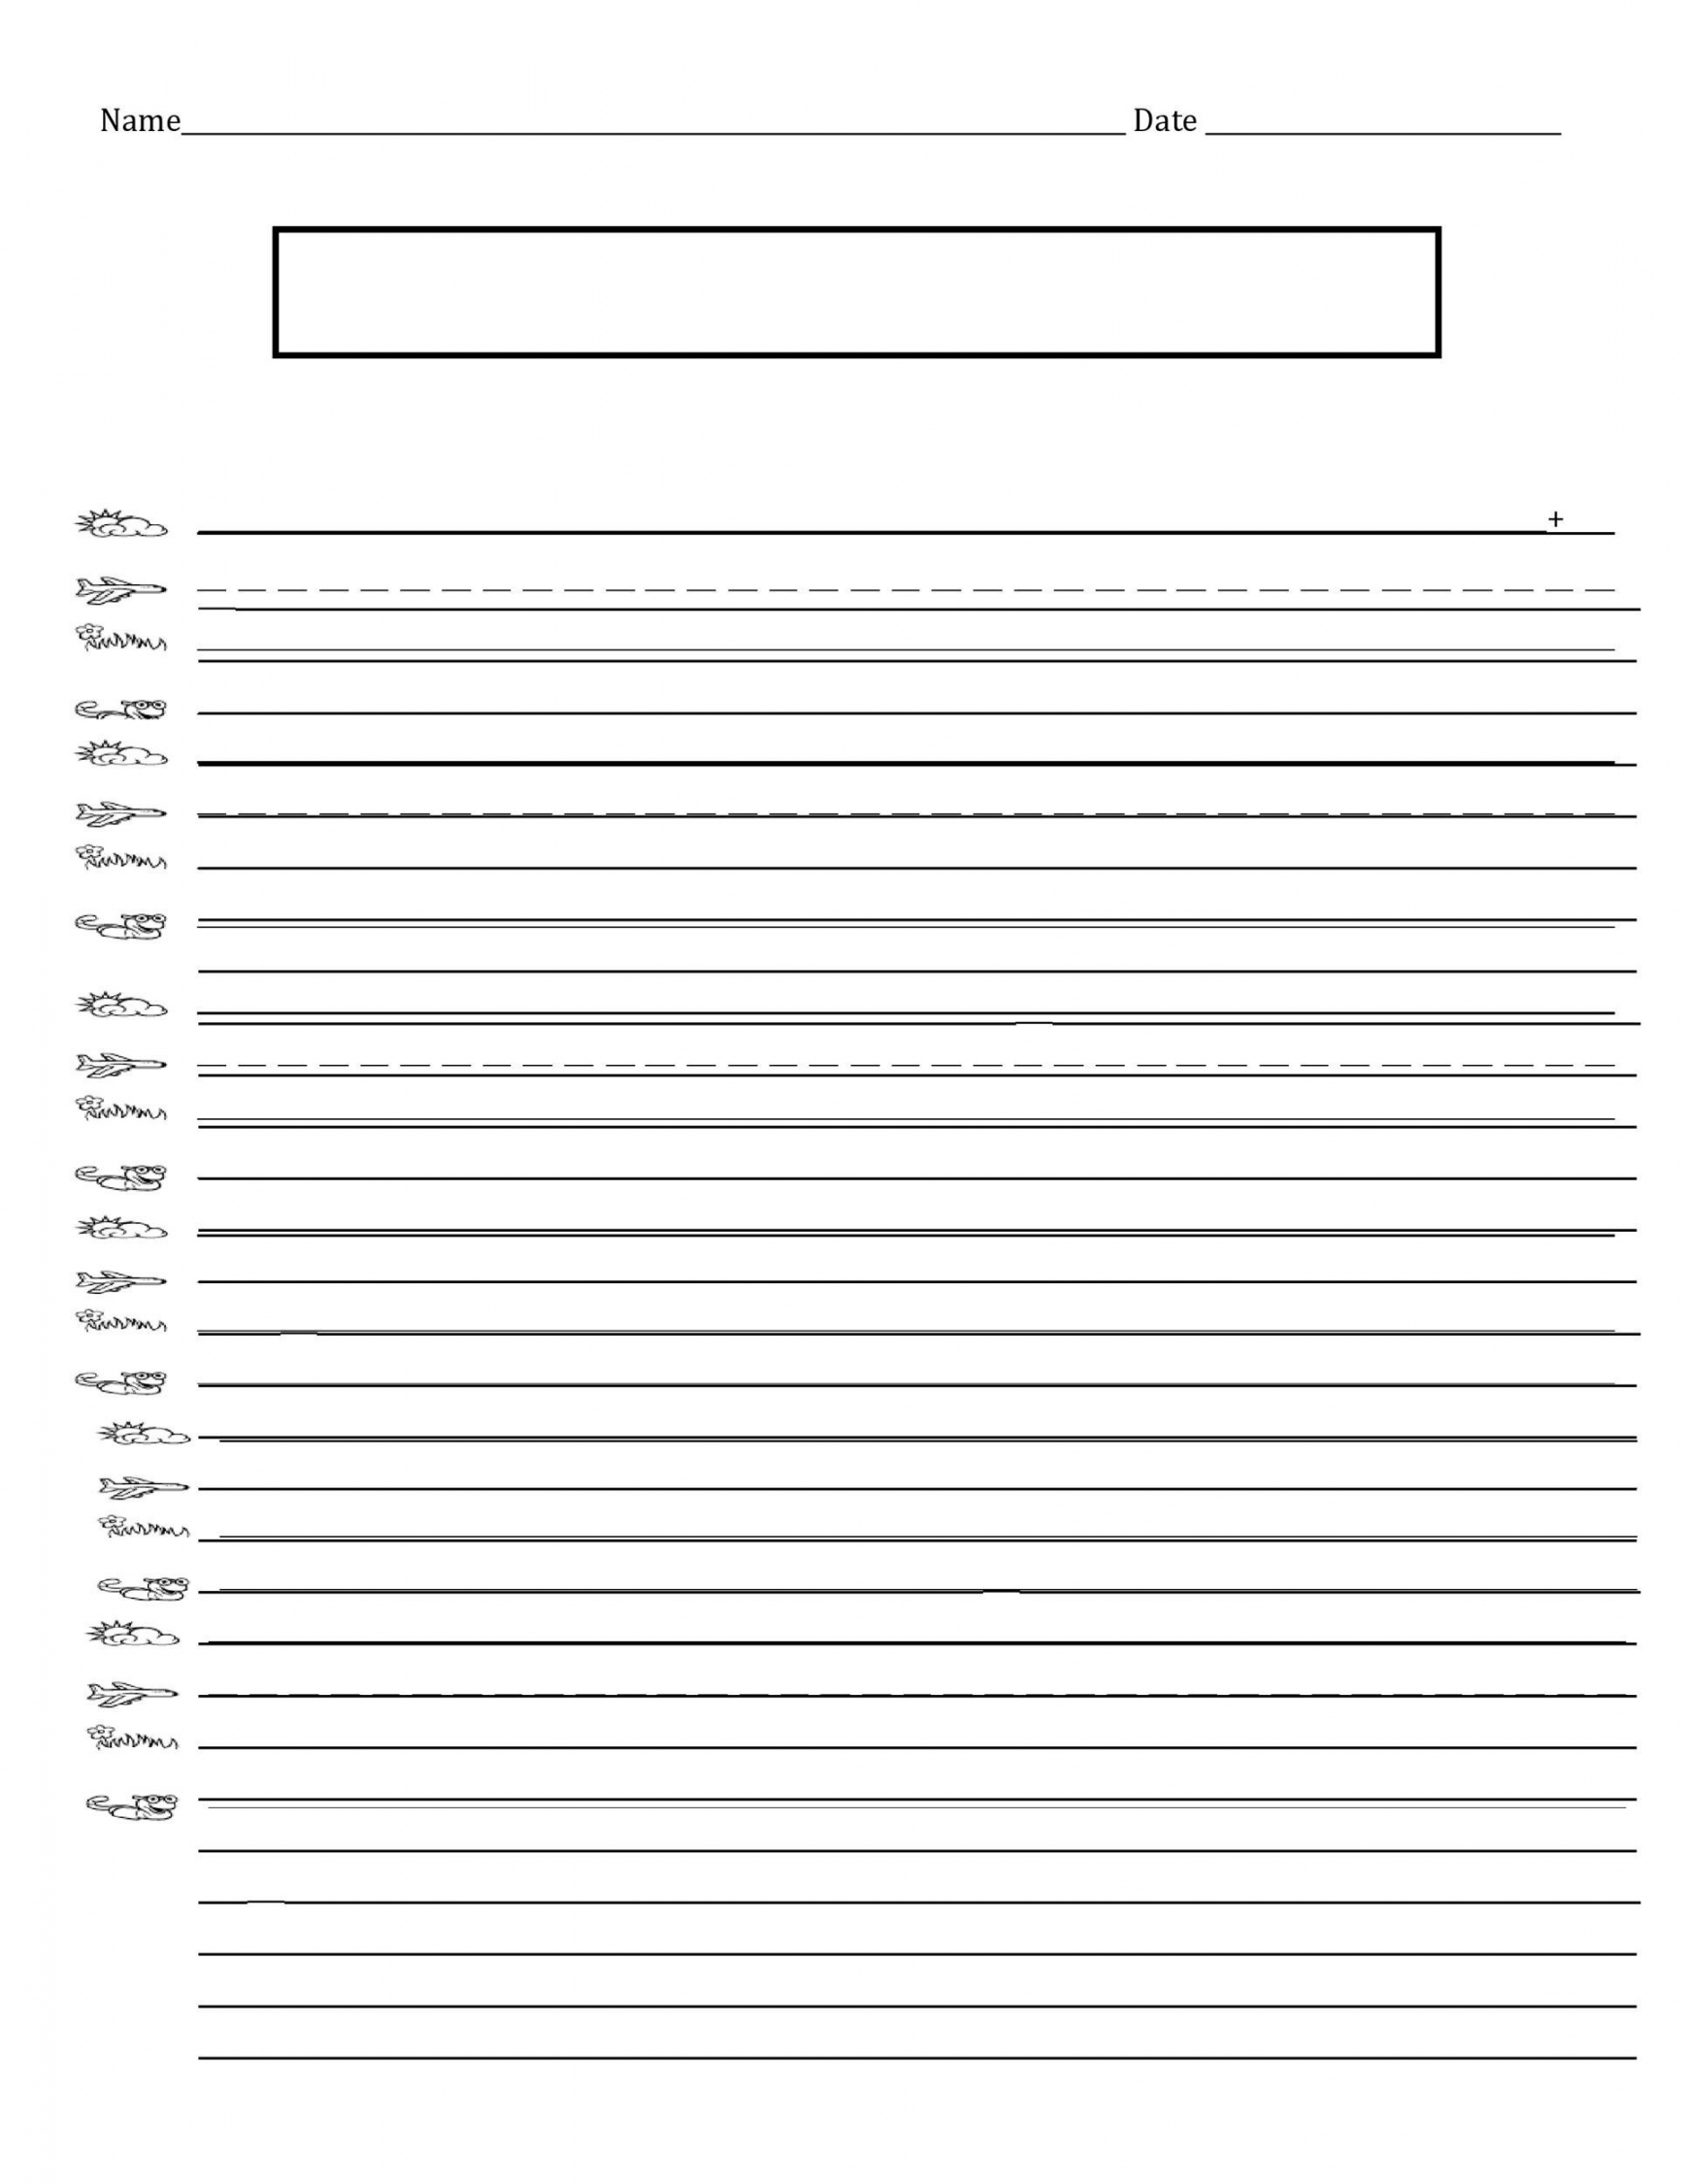 Printable Lined Paper Templates ᐅ TemplateLab - FREE Printables - Lined Writing Paper Printable